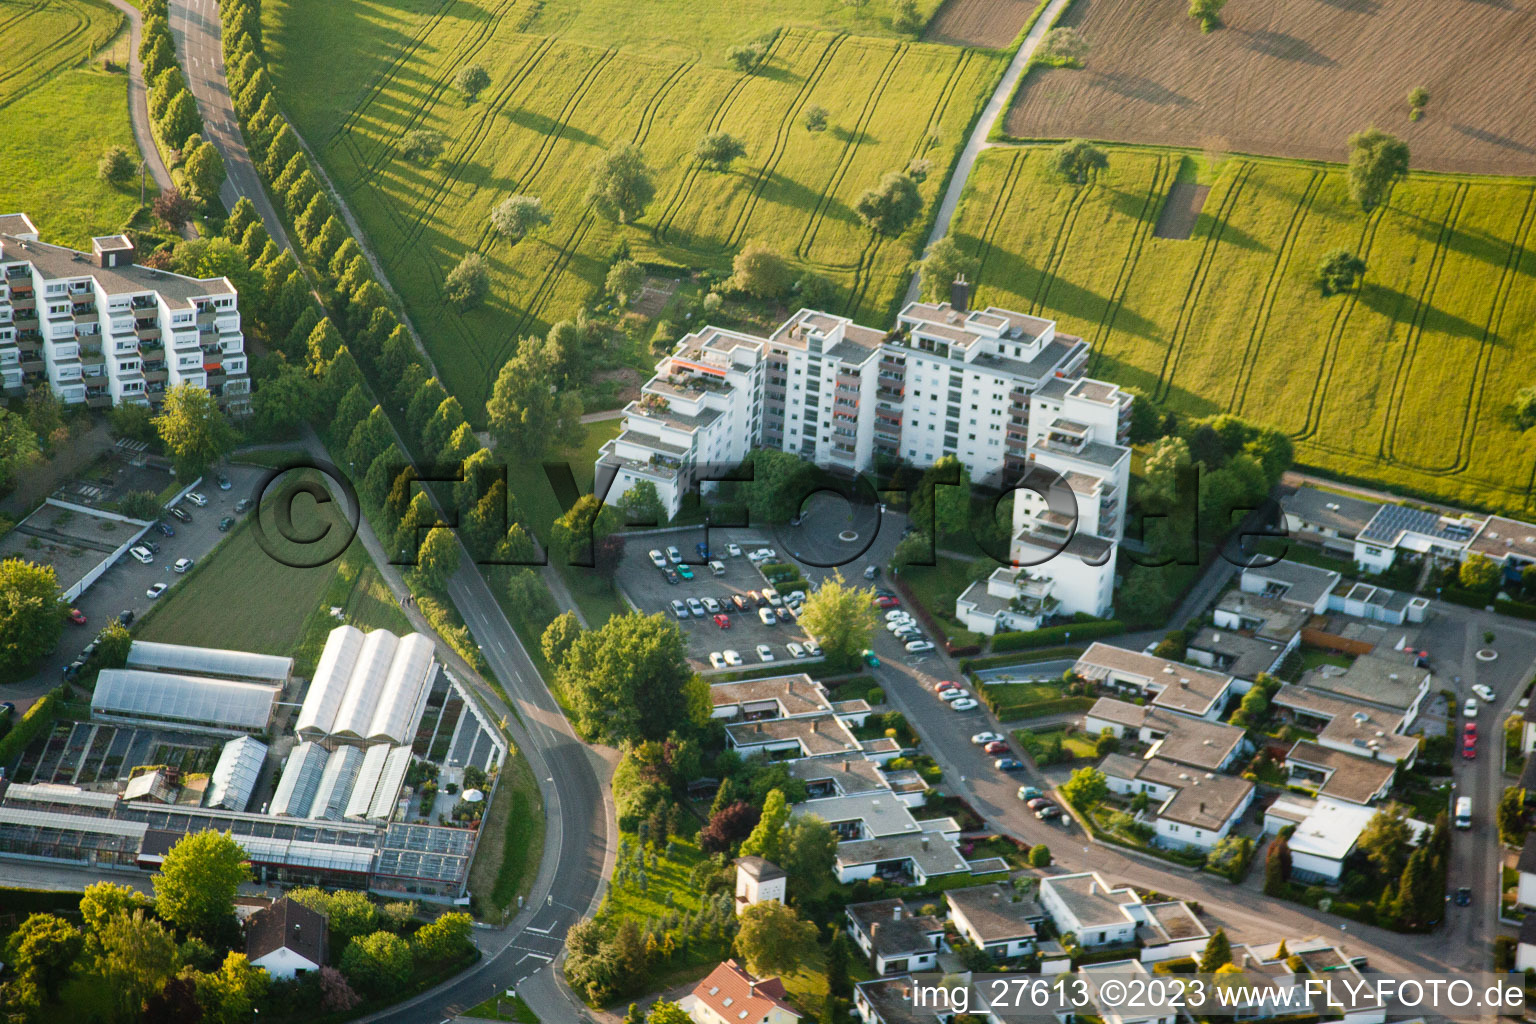 Aerial view of Acherstr in the district Reichenbach in Waldbronn in the state Baden-Wuerttemberg, Germany